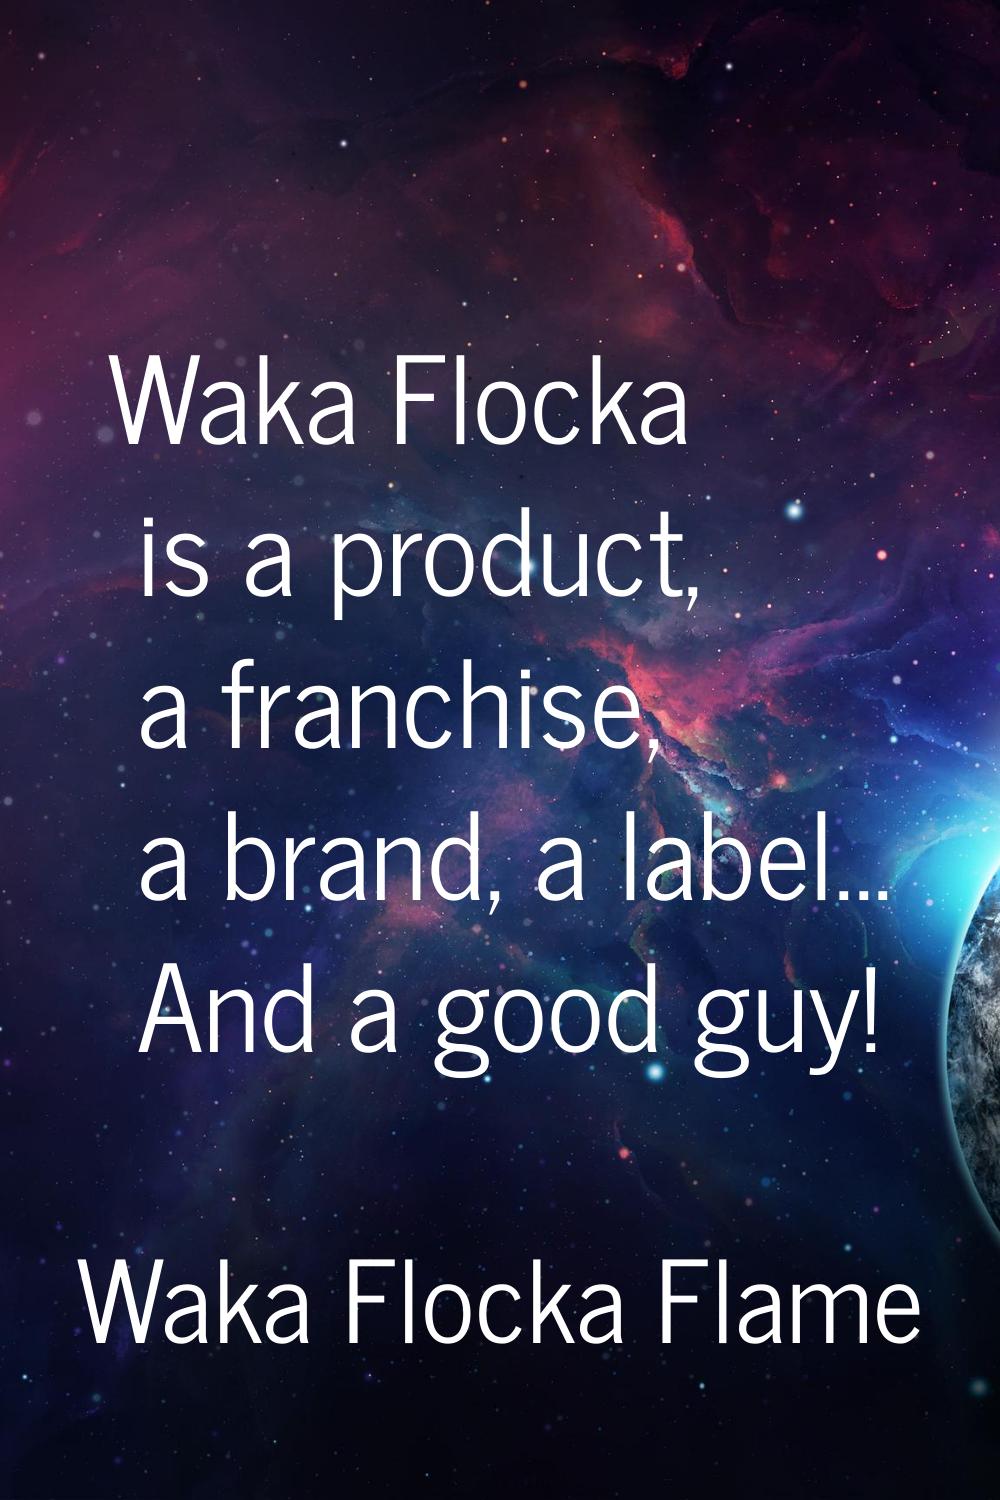 Waka Flocka is a product, a franchise, a brand, a label... And a good guy!